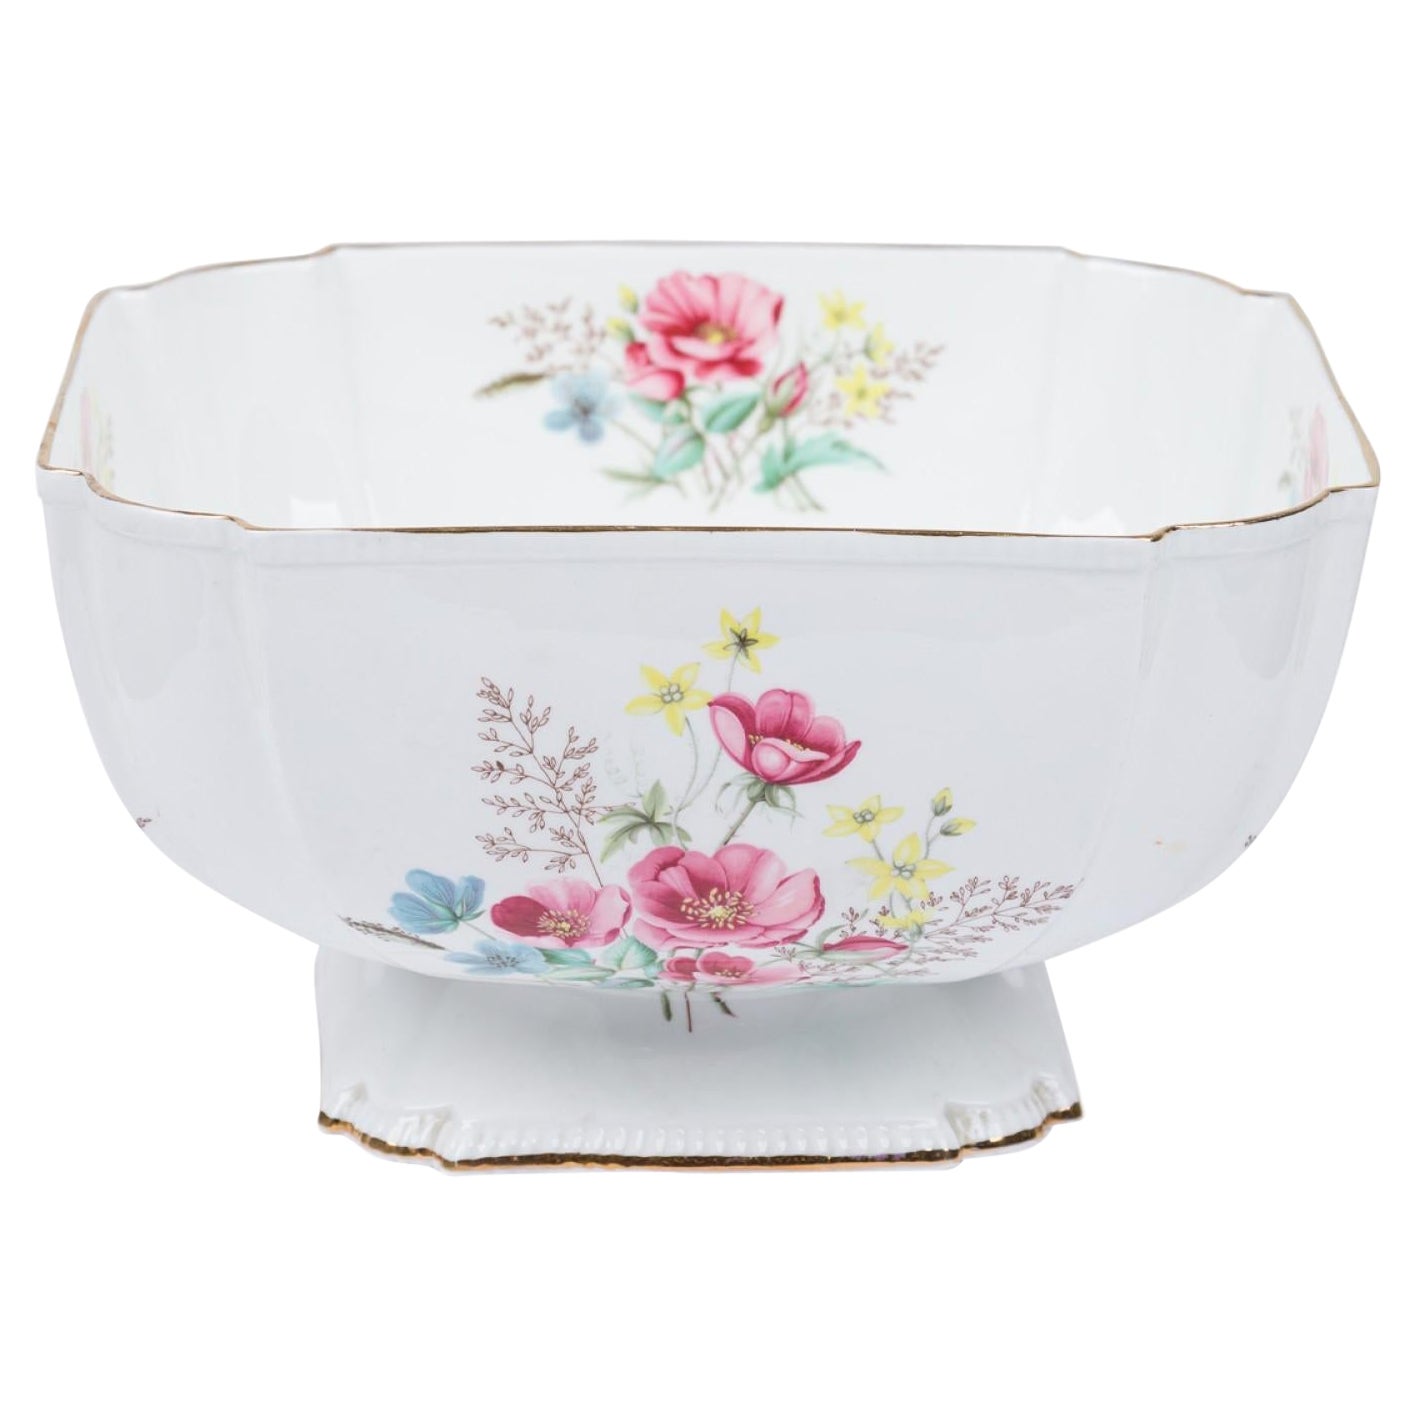 Aynsley Mid-Century English Bone China Centerpiece Bowl with Floral Decoration For Sale